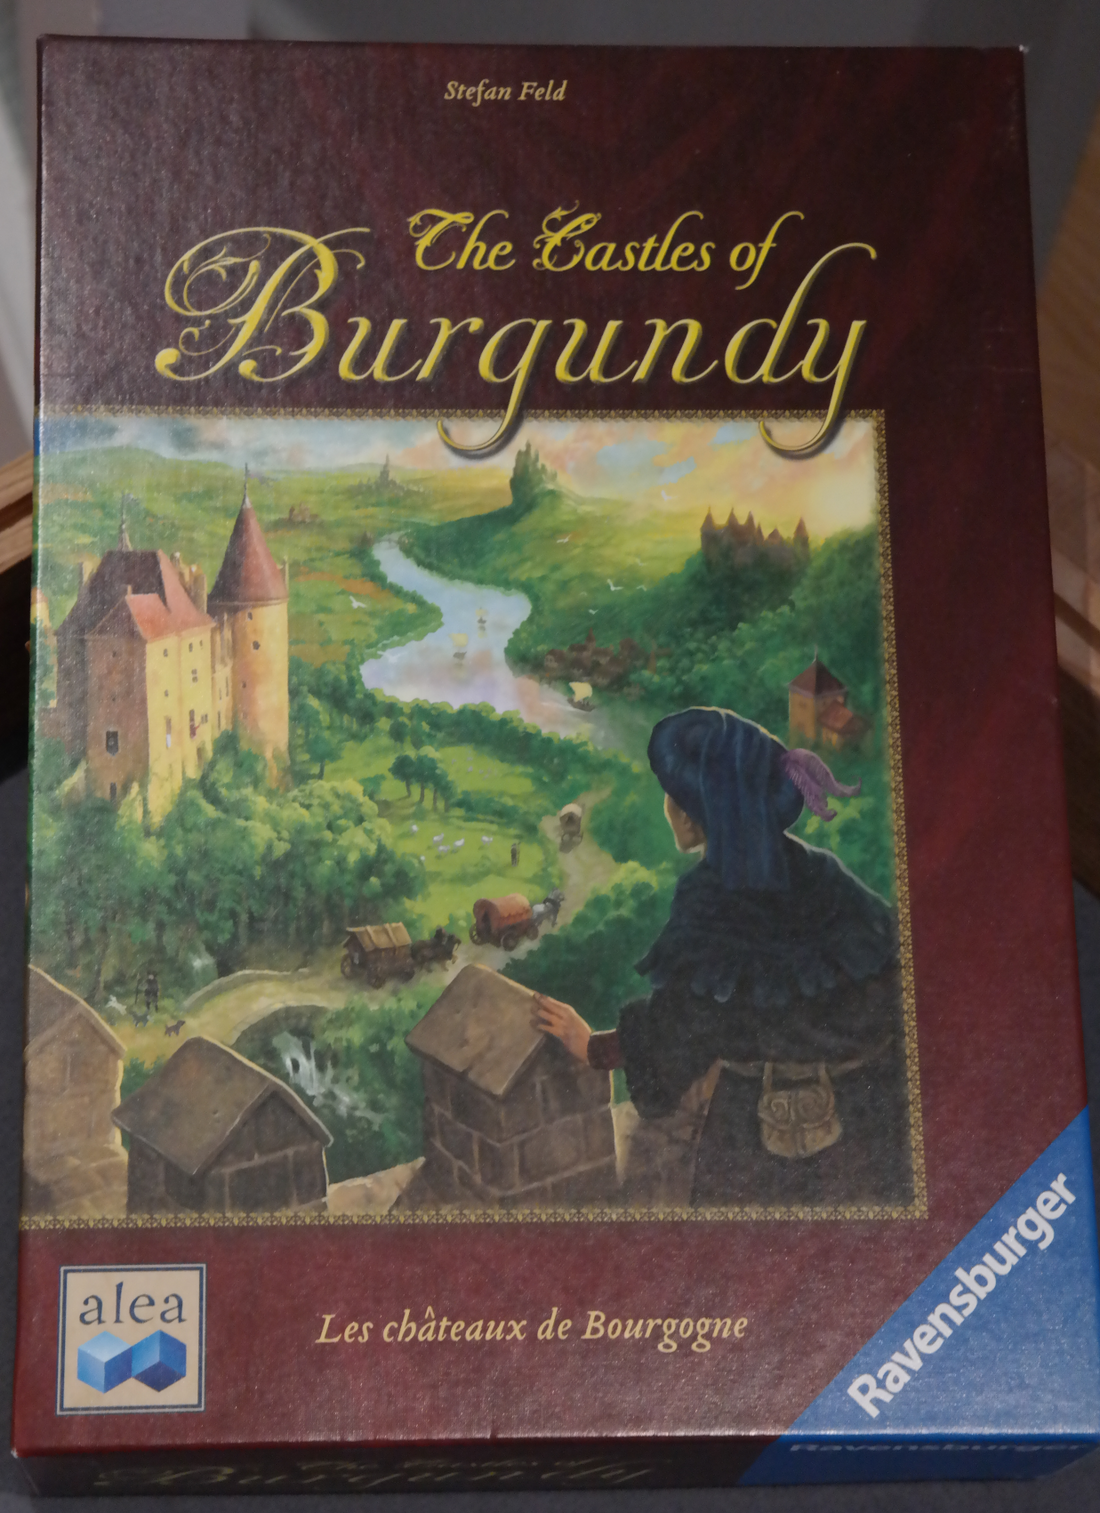 The Castles of Burgundy - Tony's Top 5 Board Games